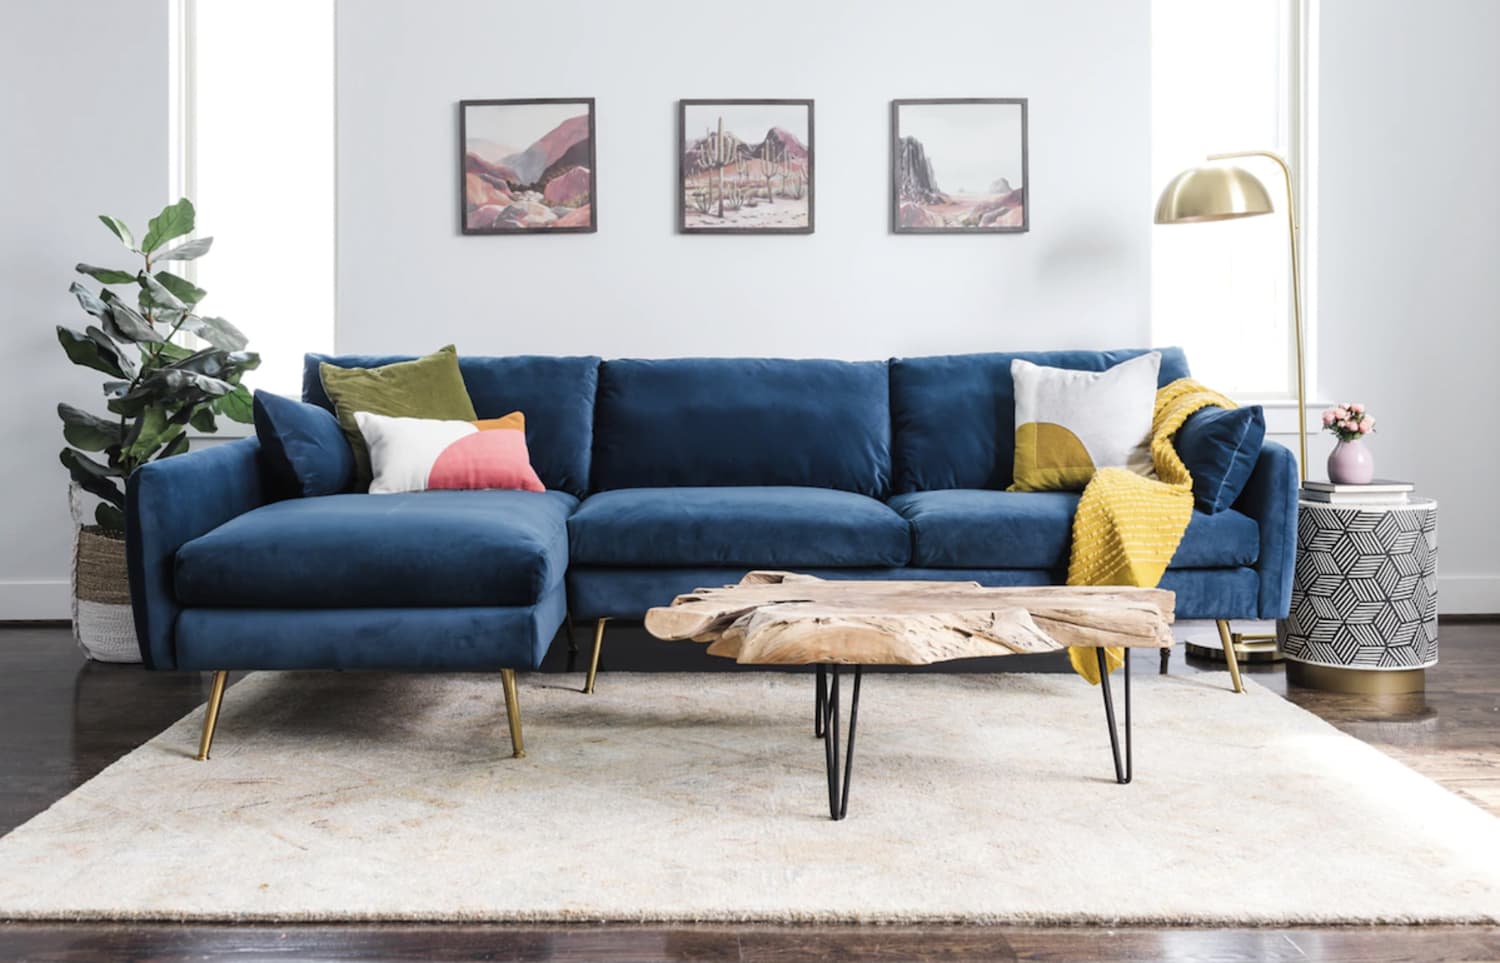 My Favorite Comfy (and Easy-to-Assemble!) Sofa Brand Has a Ridiculously Chic Line That Looks Way More Expensive Than It Is — and They’re Having a Sale